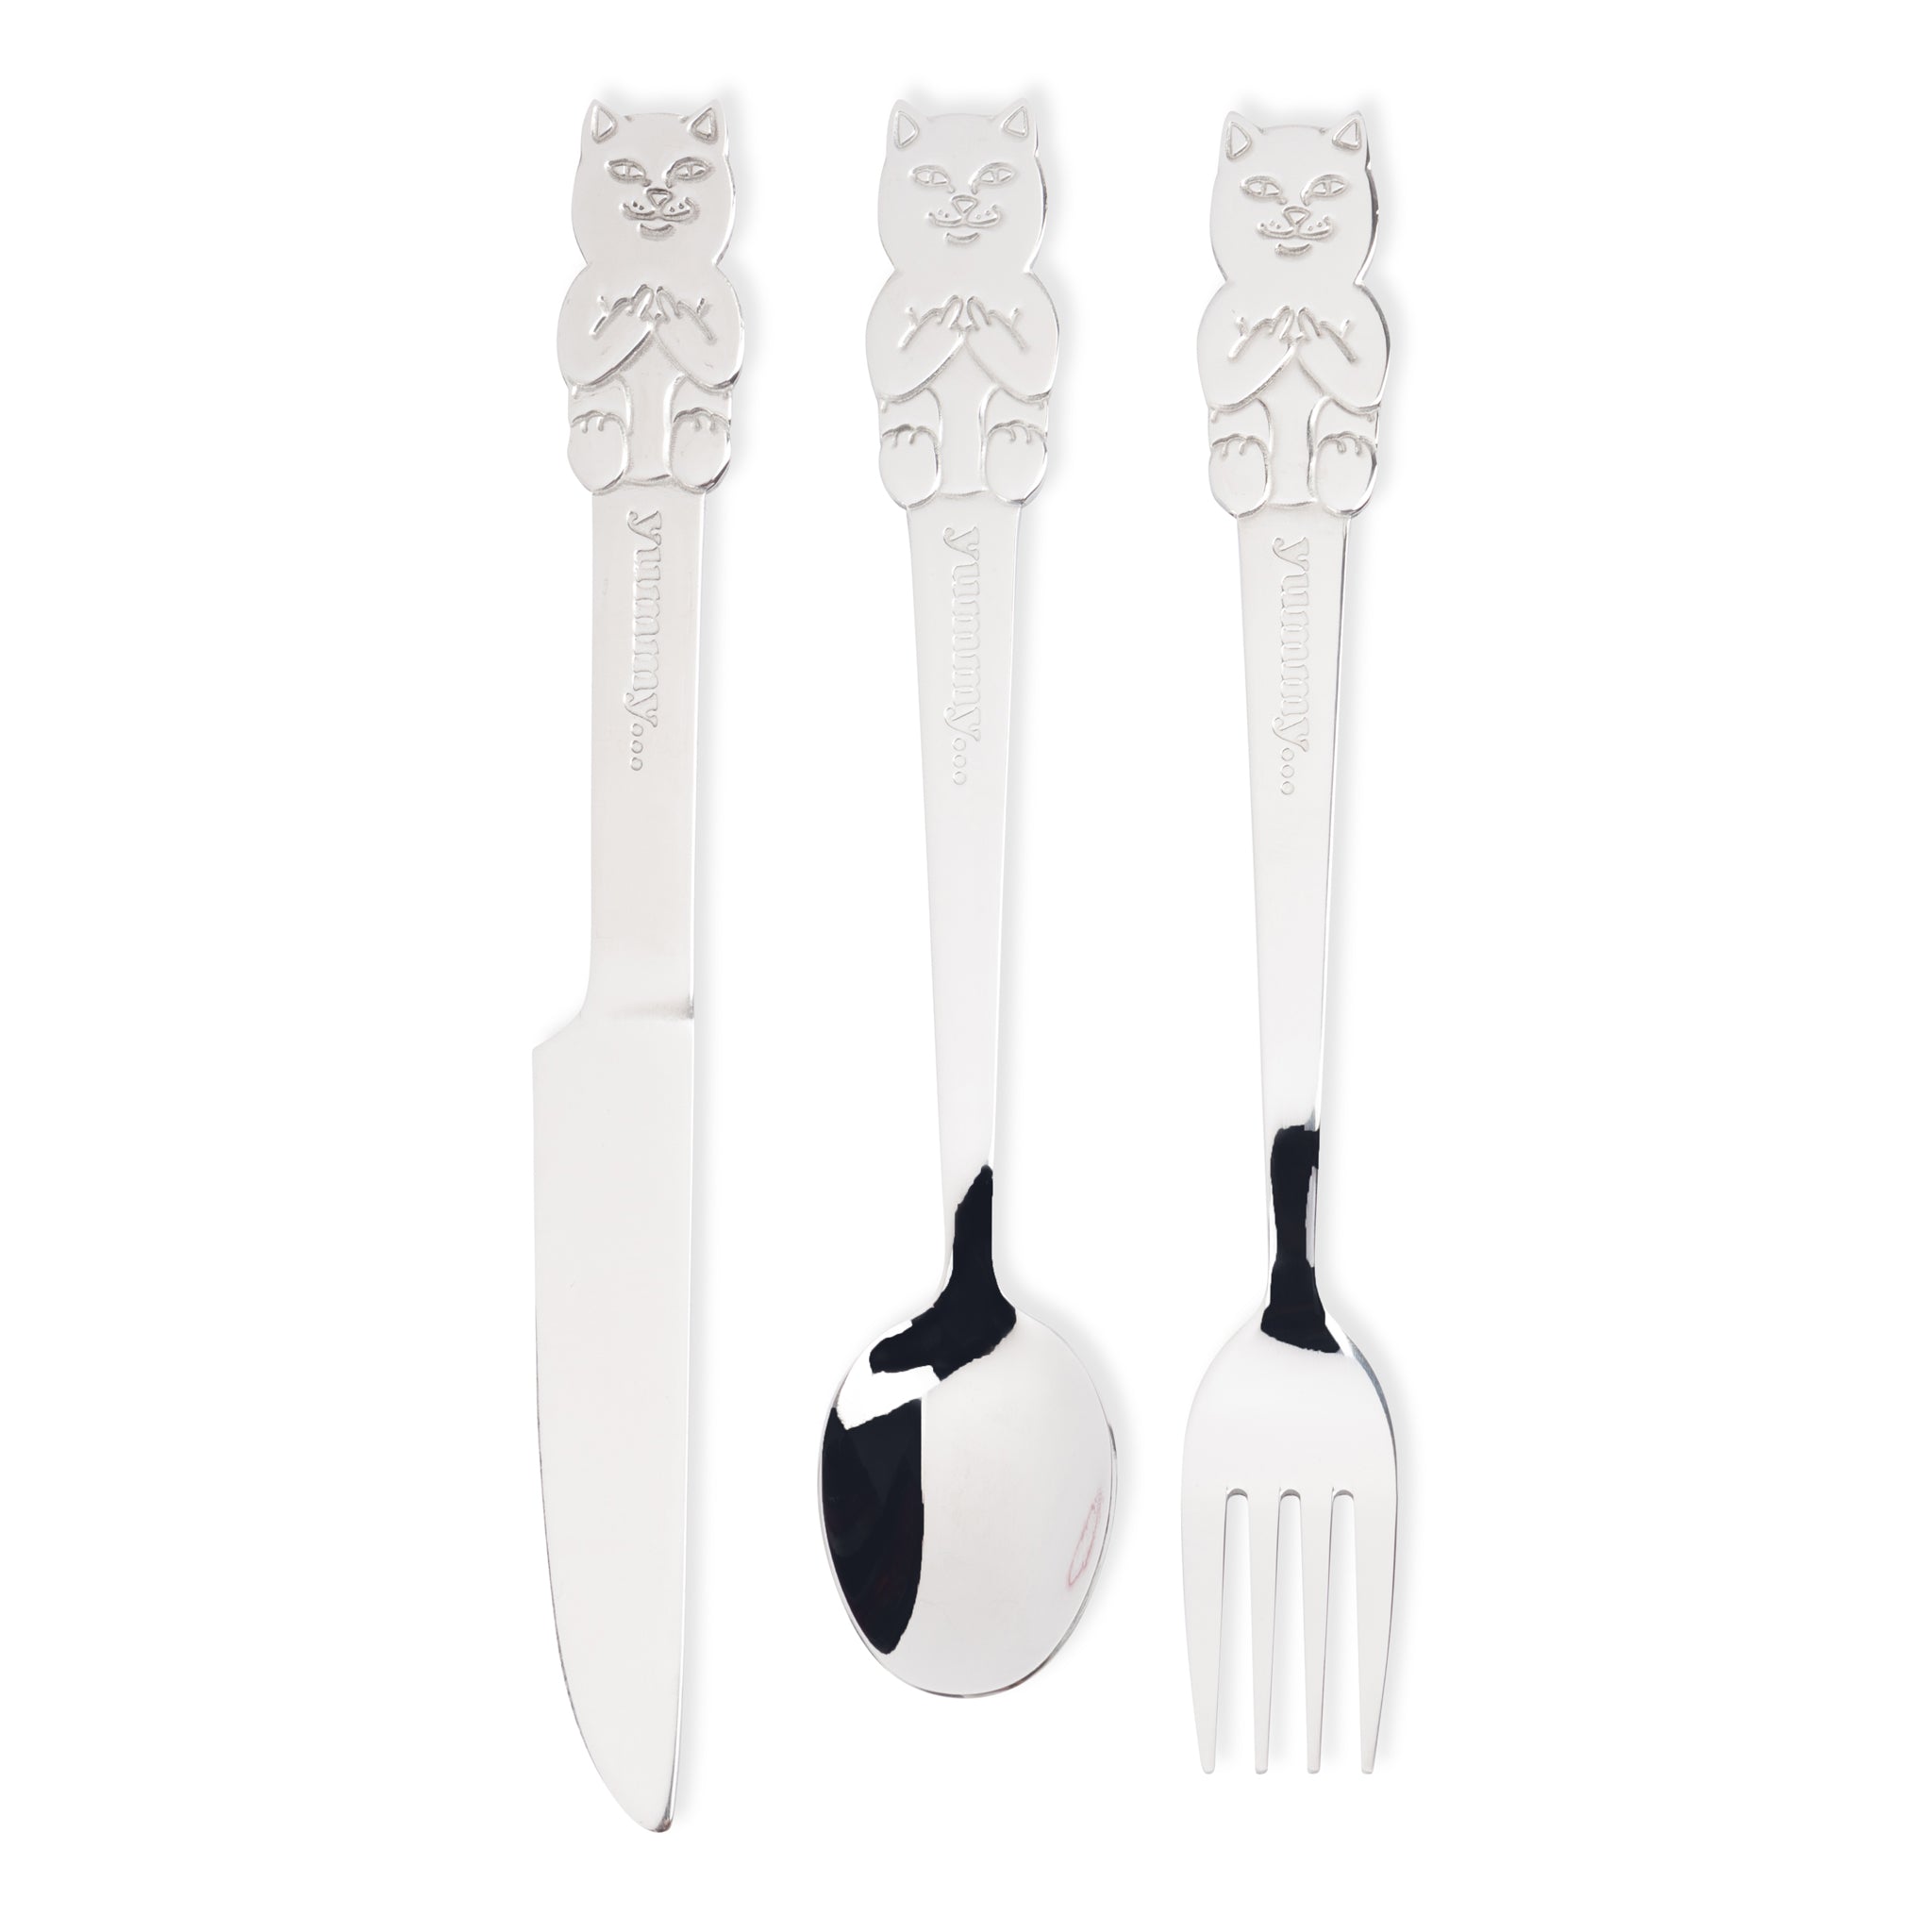 Lord Nermal 3 PC Cutlery Set (Silver)